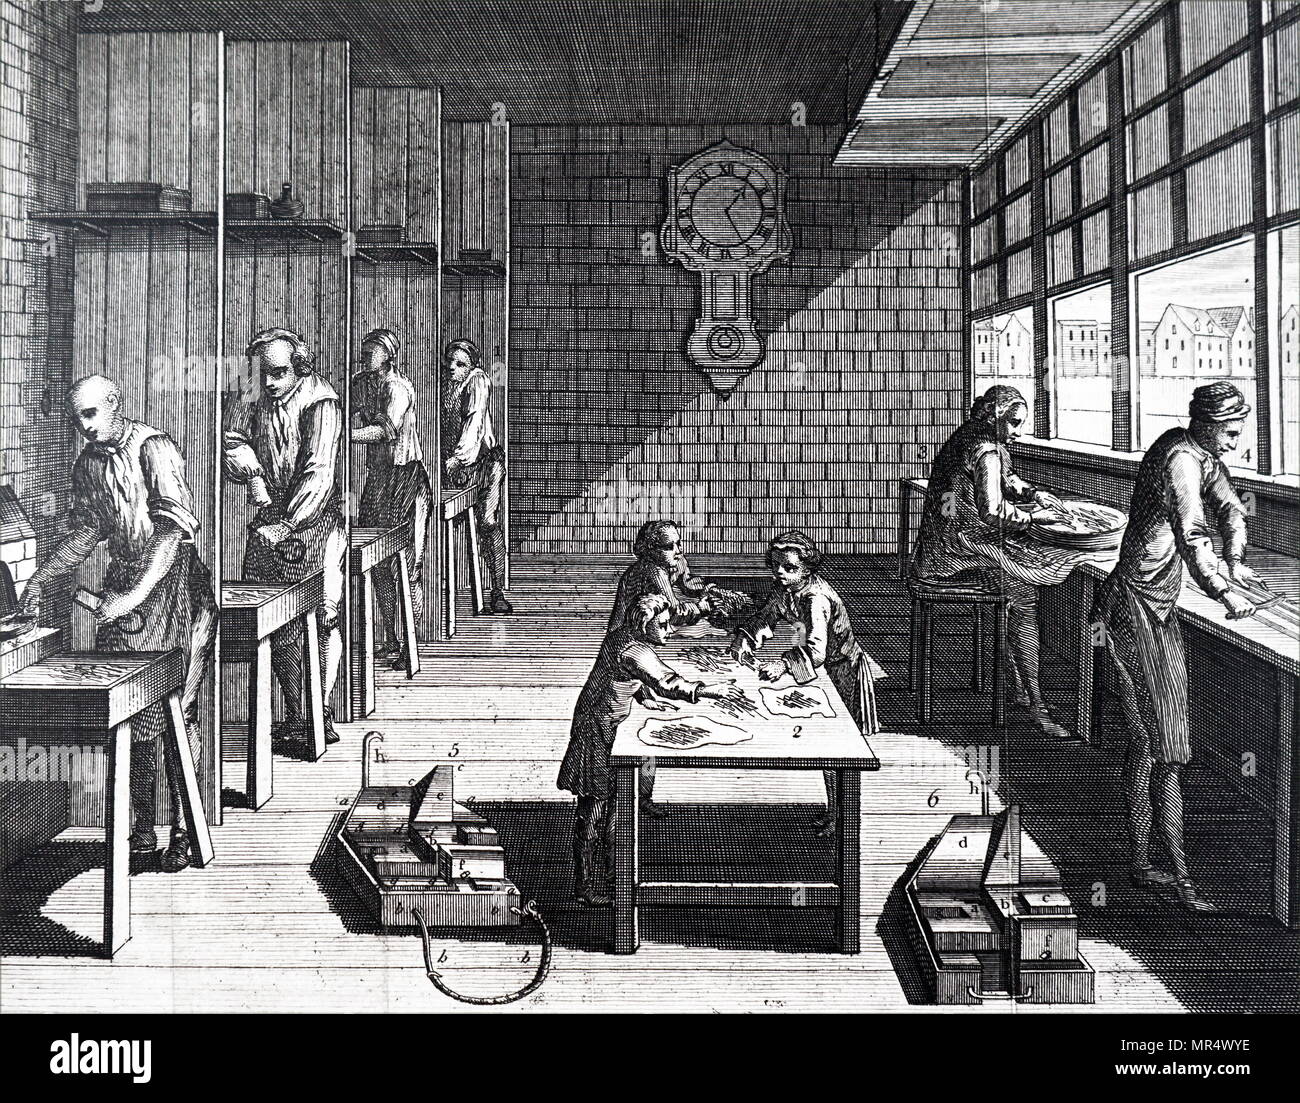 Illustration depicting the process of casting type: At 1) on left are 4 type-founders, each with a small furnace for melting the alloy of lead and iron from which the type is cast. The man at the front is filling a ladle with molten metal, ready to tip it into the mould in his left hand. The average number of letters cast in a day was 3000. The letters are next passed to the boys at 2) who break off the shanks. At 3) they are rubbed on a stone to remove un-wanted roughness, and at 4) they are cut to one length. Dated 18th century Stock Photo